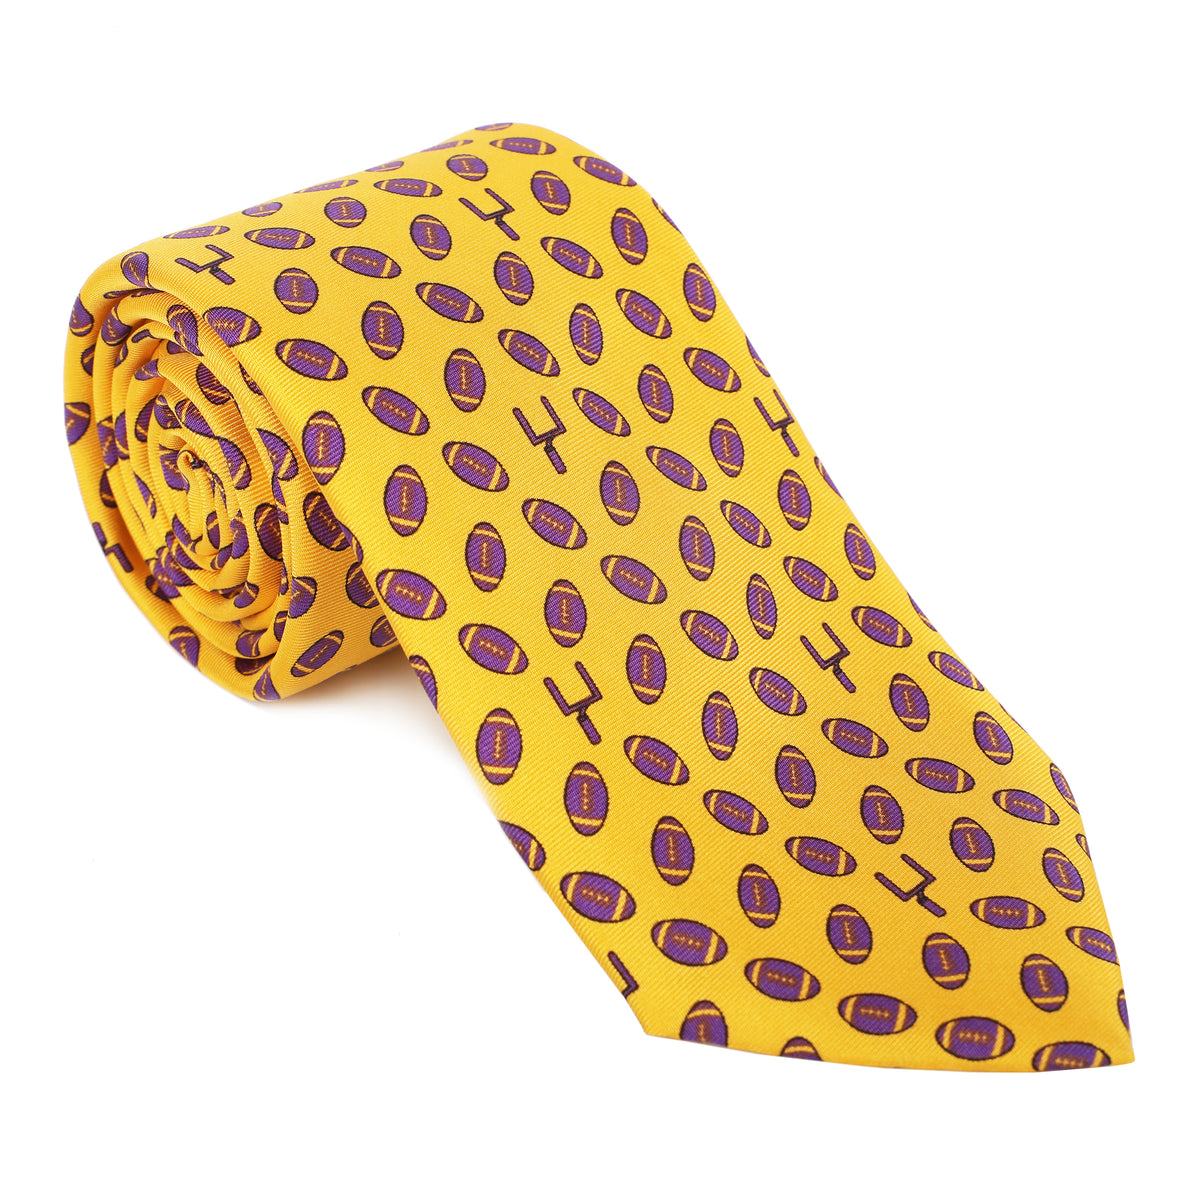 Represent like royalty in our regal 100% silk ties. Purple &amp; gold and good to geaux (go)! Tie one on so you can tie one on!  Limited Edition Haspel x NOLA Couture Exclusive Collaboration  •  100% Silk  •  3&quot; Wide  •  Seersucker Tipped and Seersucker Keeper  •  Made in USA